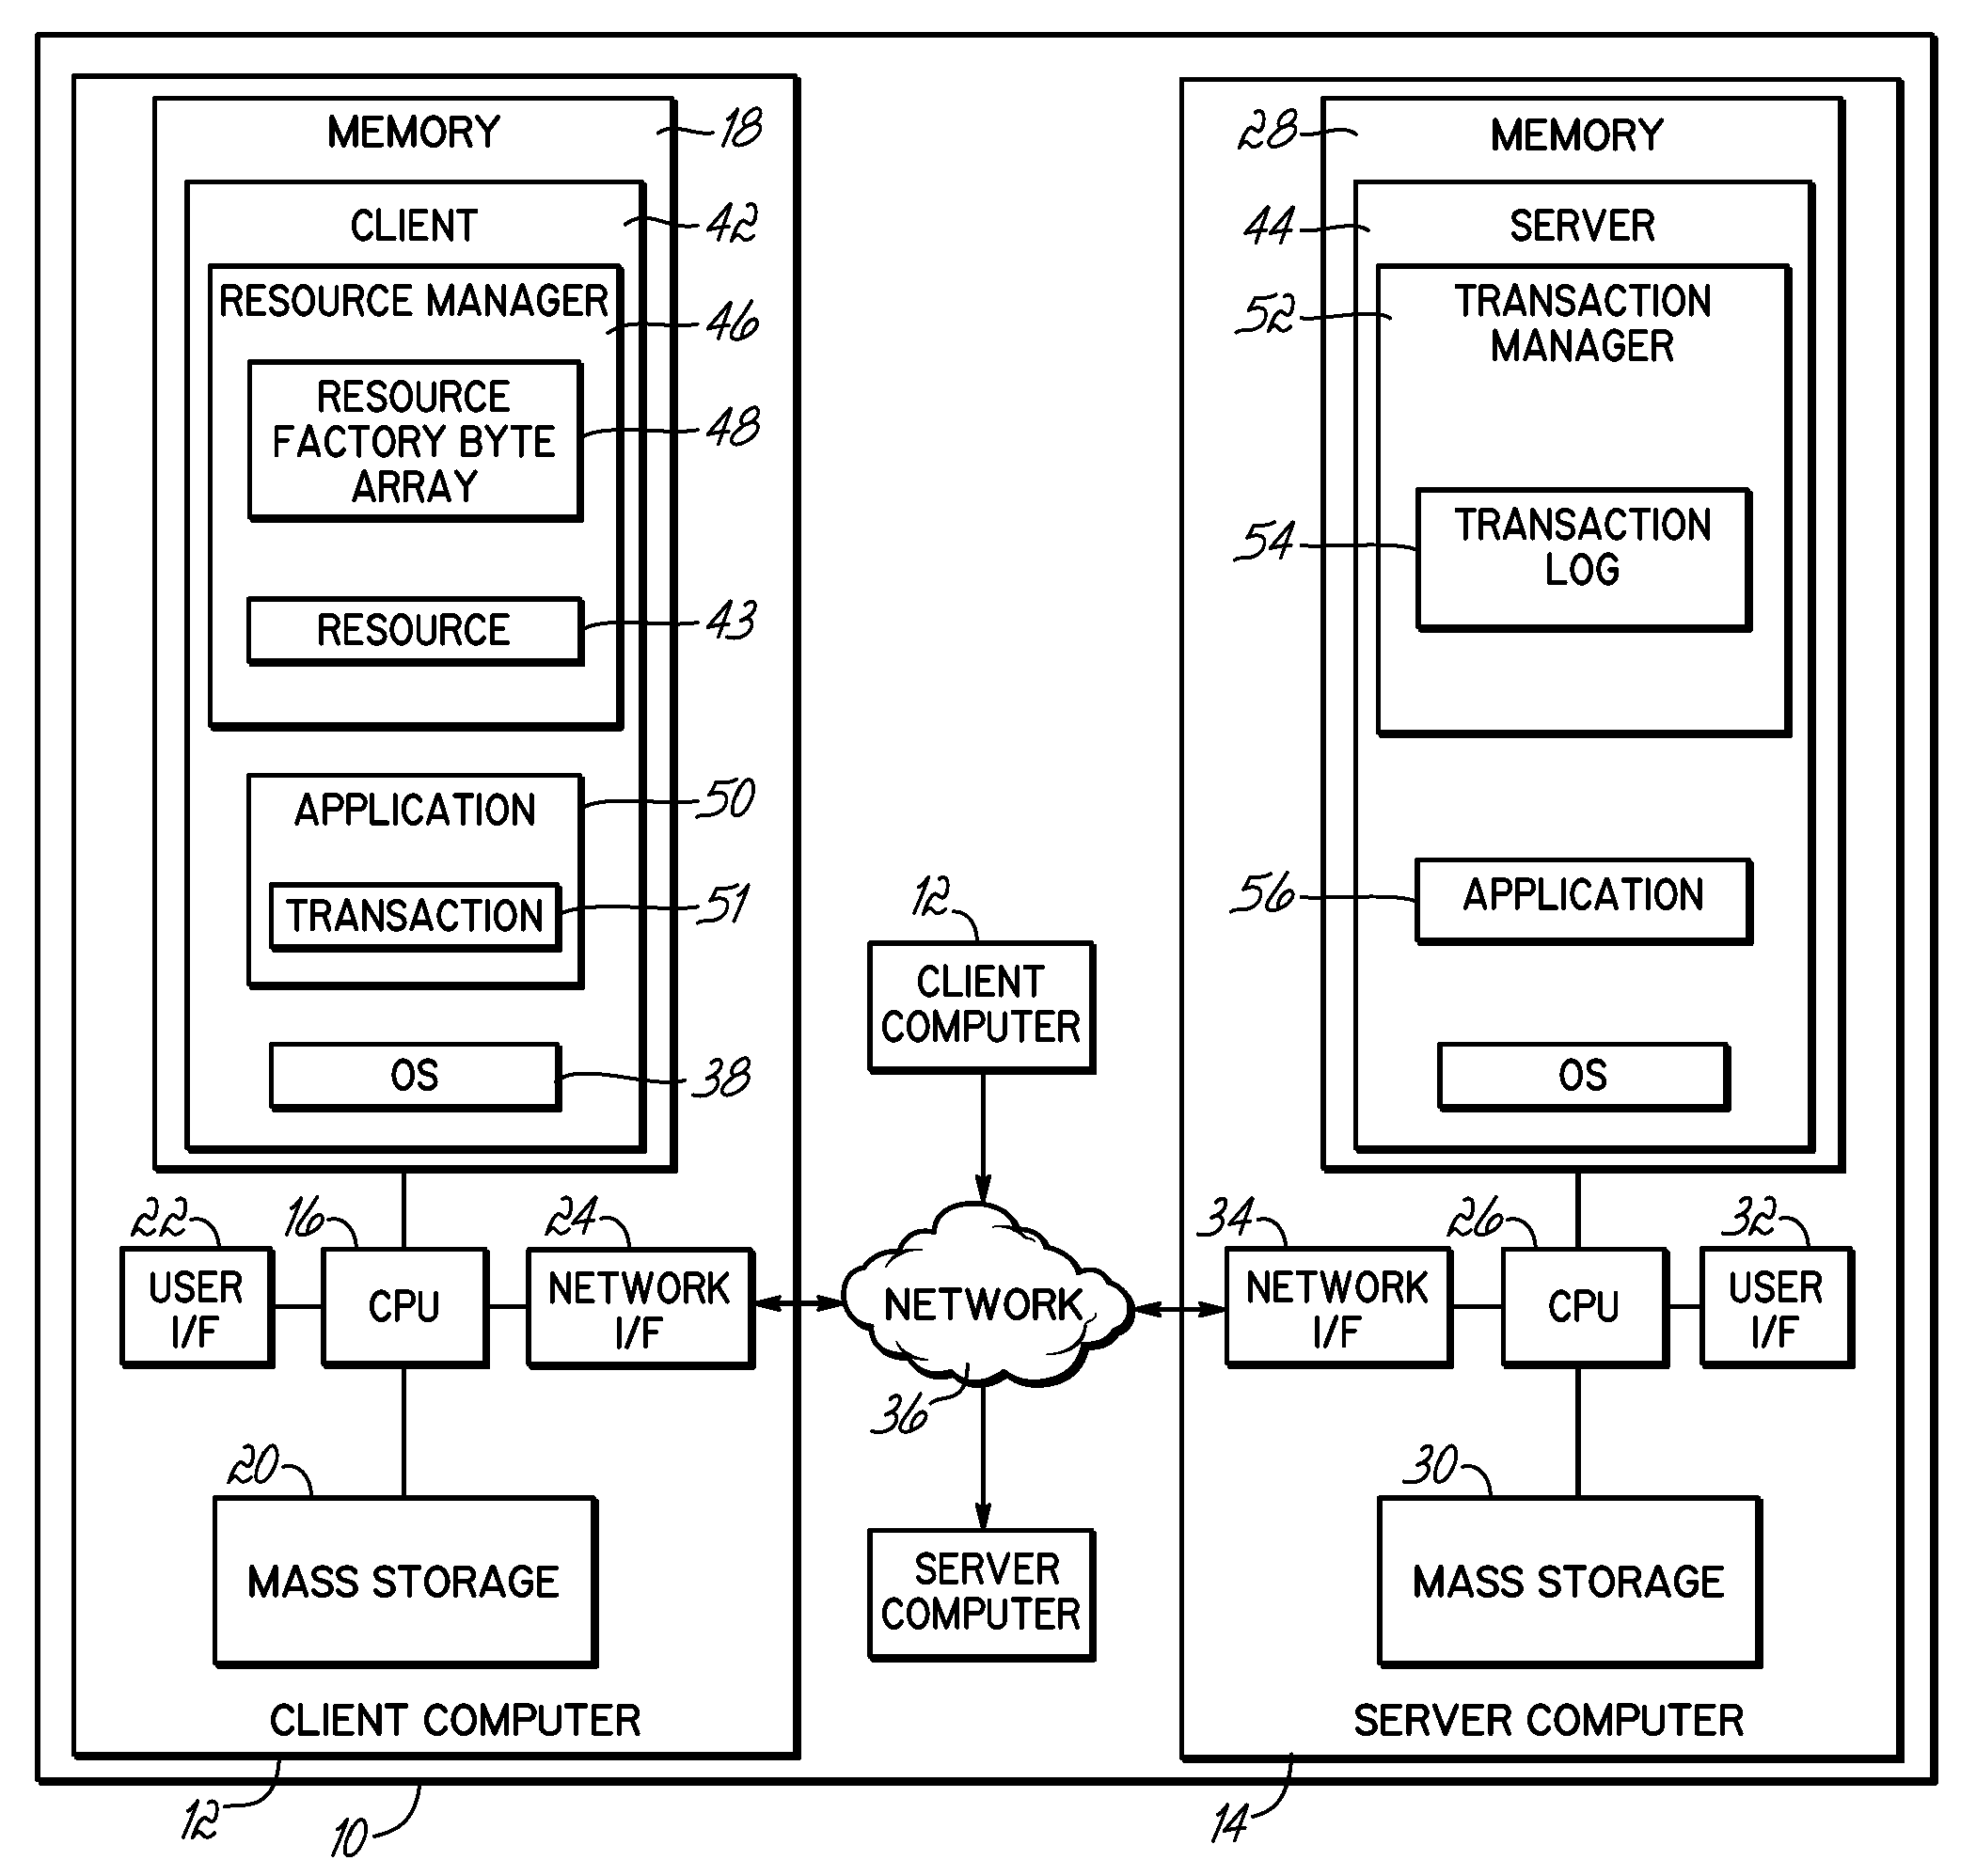 Storing Information for Dynamically Enlisted Resources in a Transaction